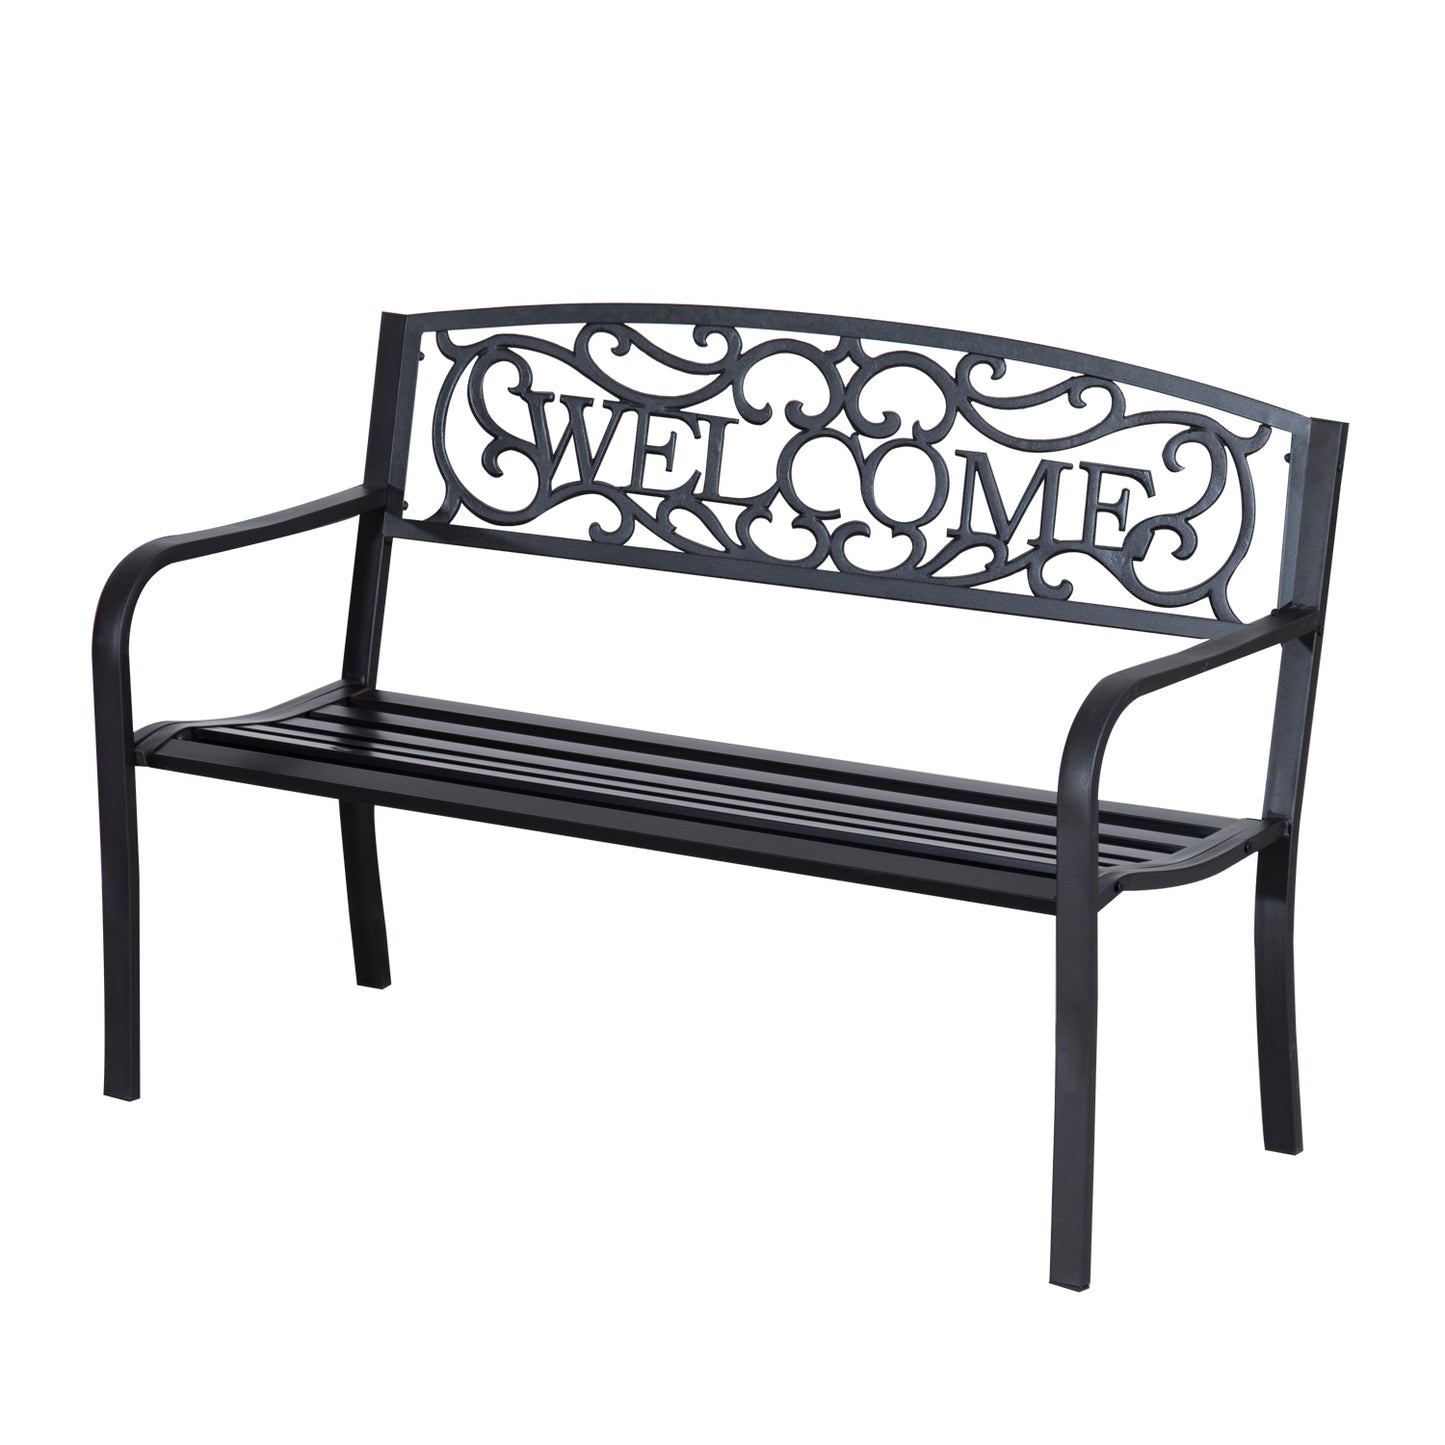 Outsunny 126Lx60Wx85H cm Steel Bench-Black